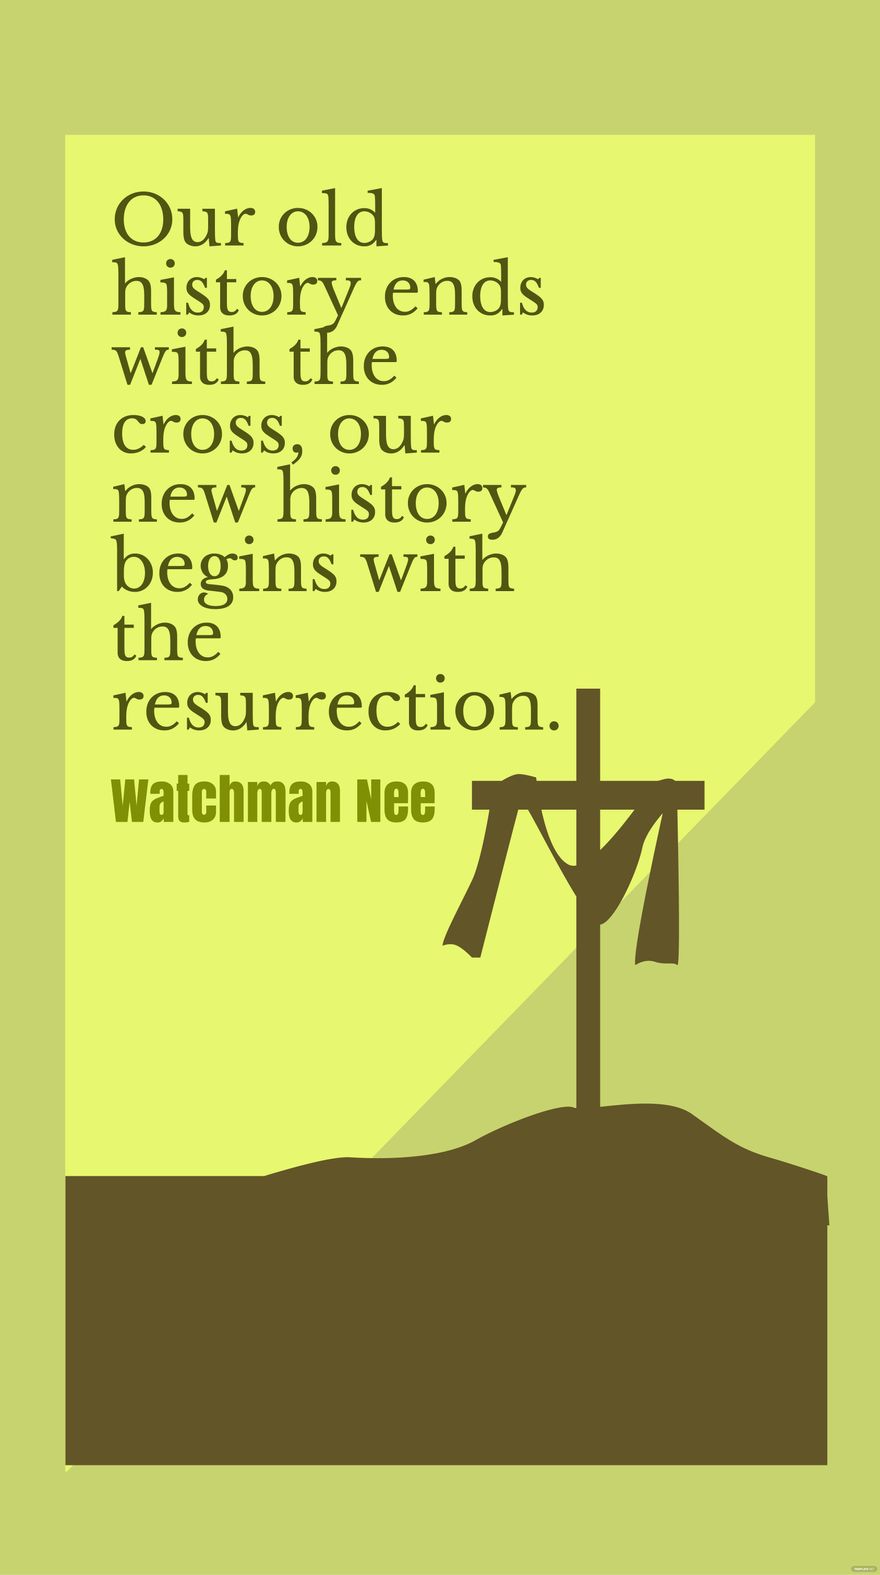 Watchman Nee - Our old history ends with the cross, our new history begins with the resurrection.